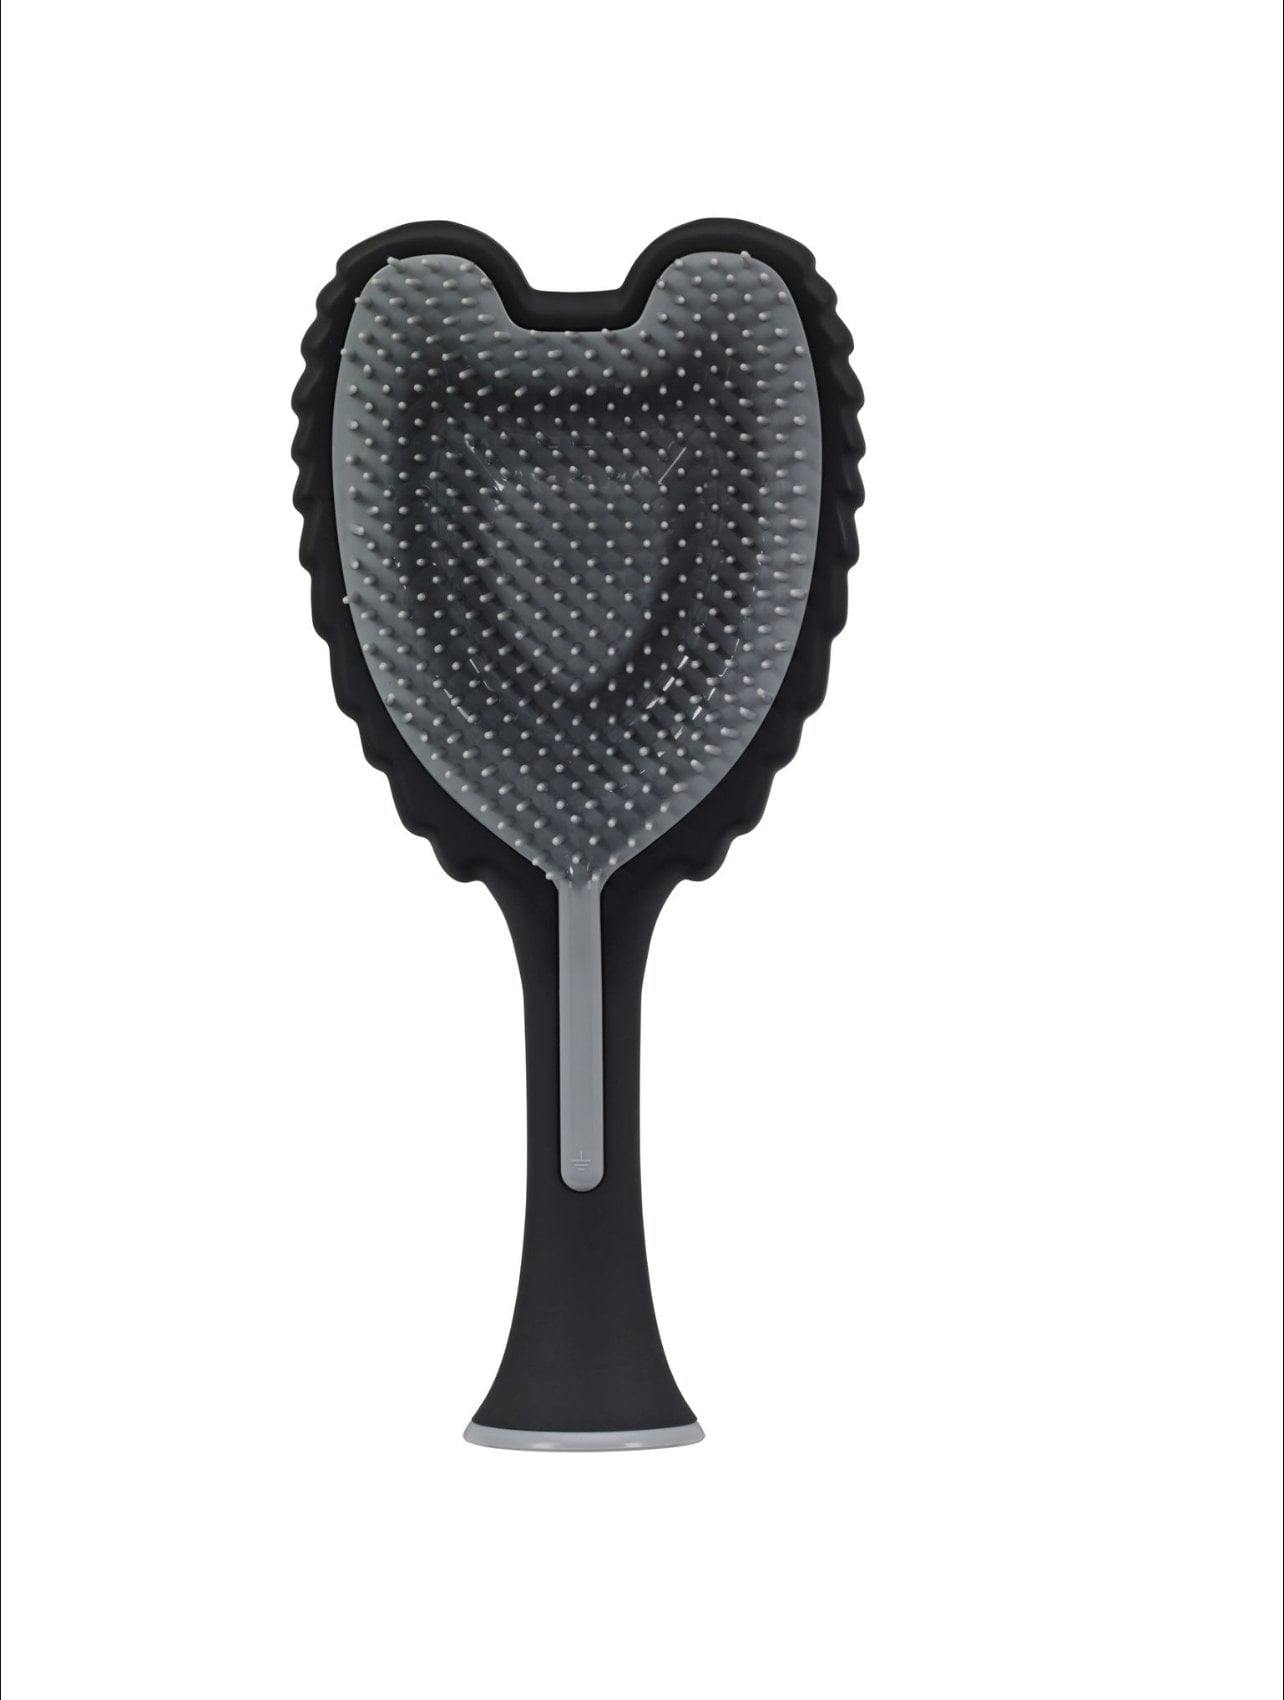 Tangle Angel Angel 2.0 Soft Touch Black